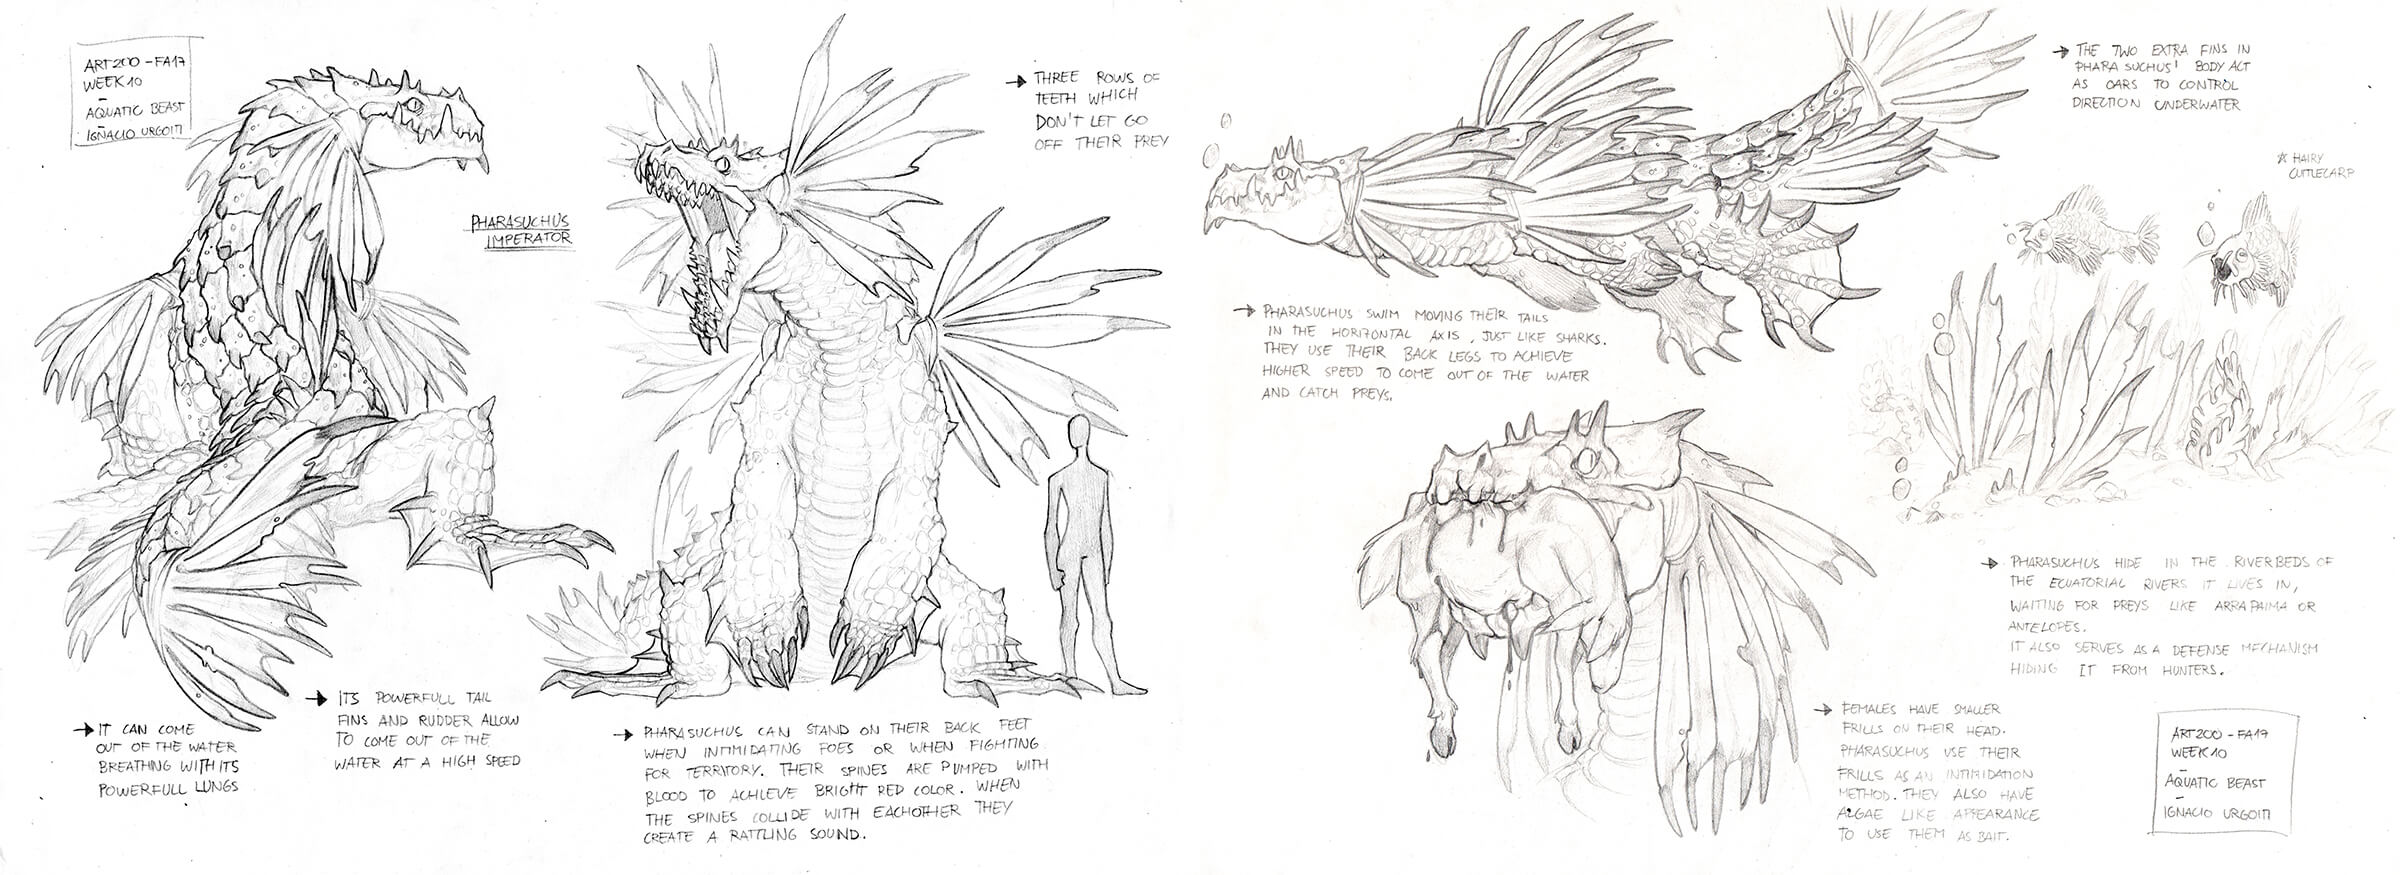 Black-and-white concept sketches of a frilled dragon-like creature in flight, standing, and eating an animal.